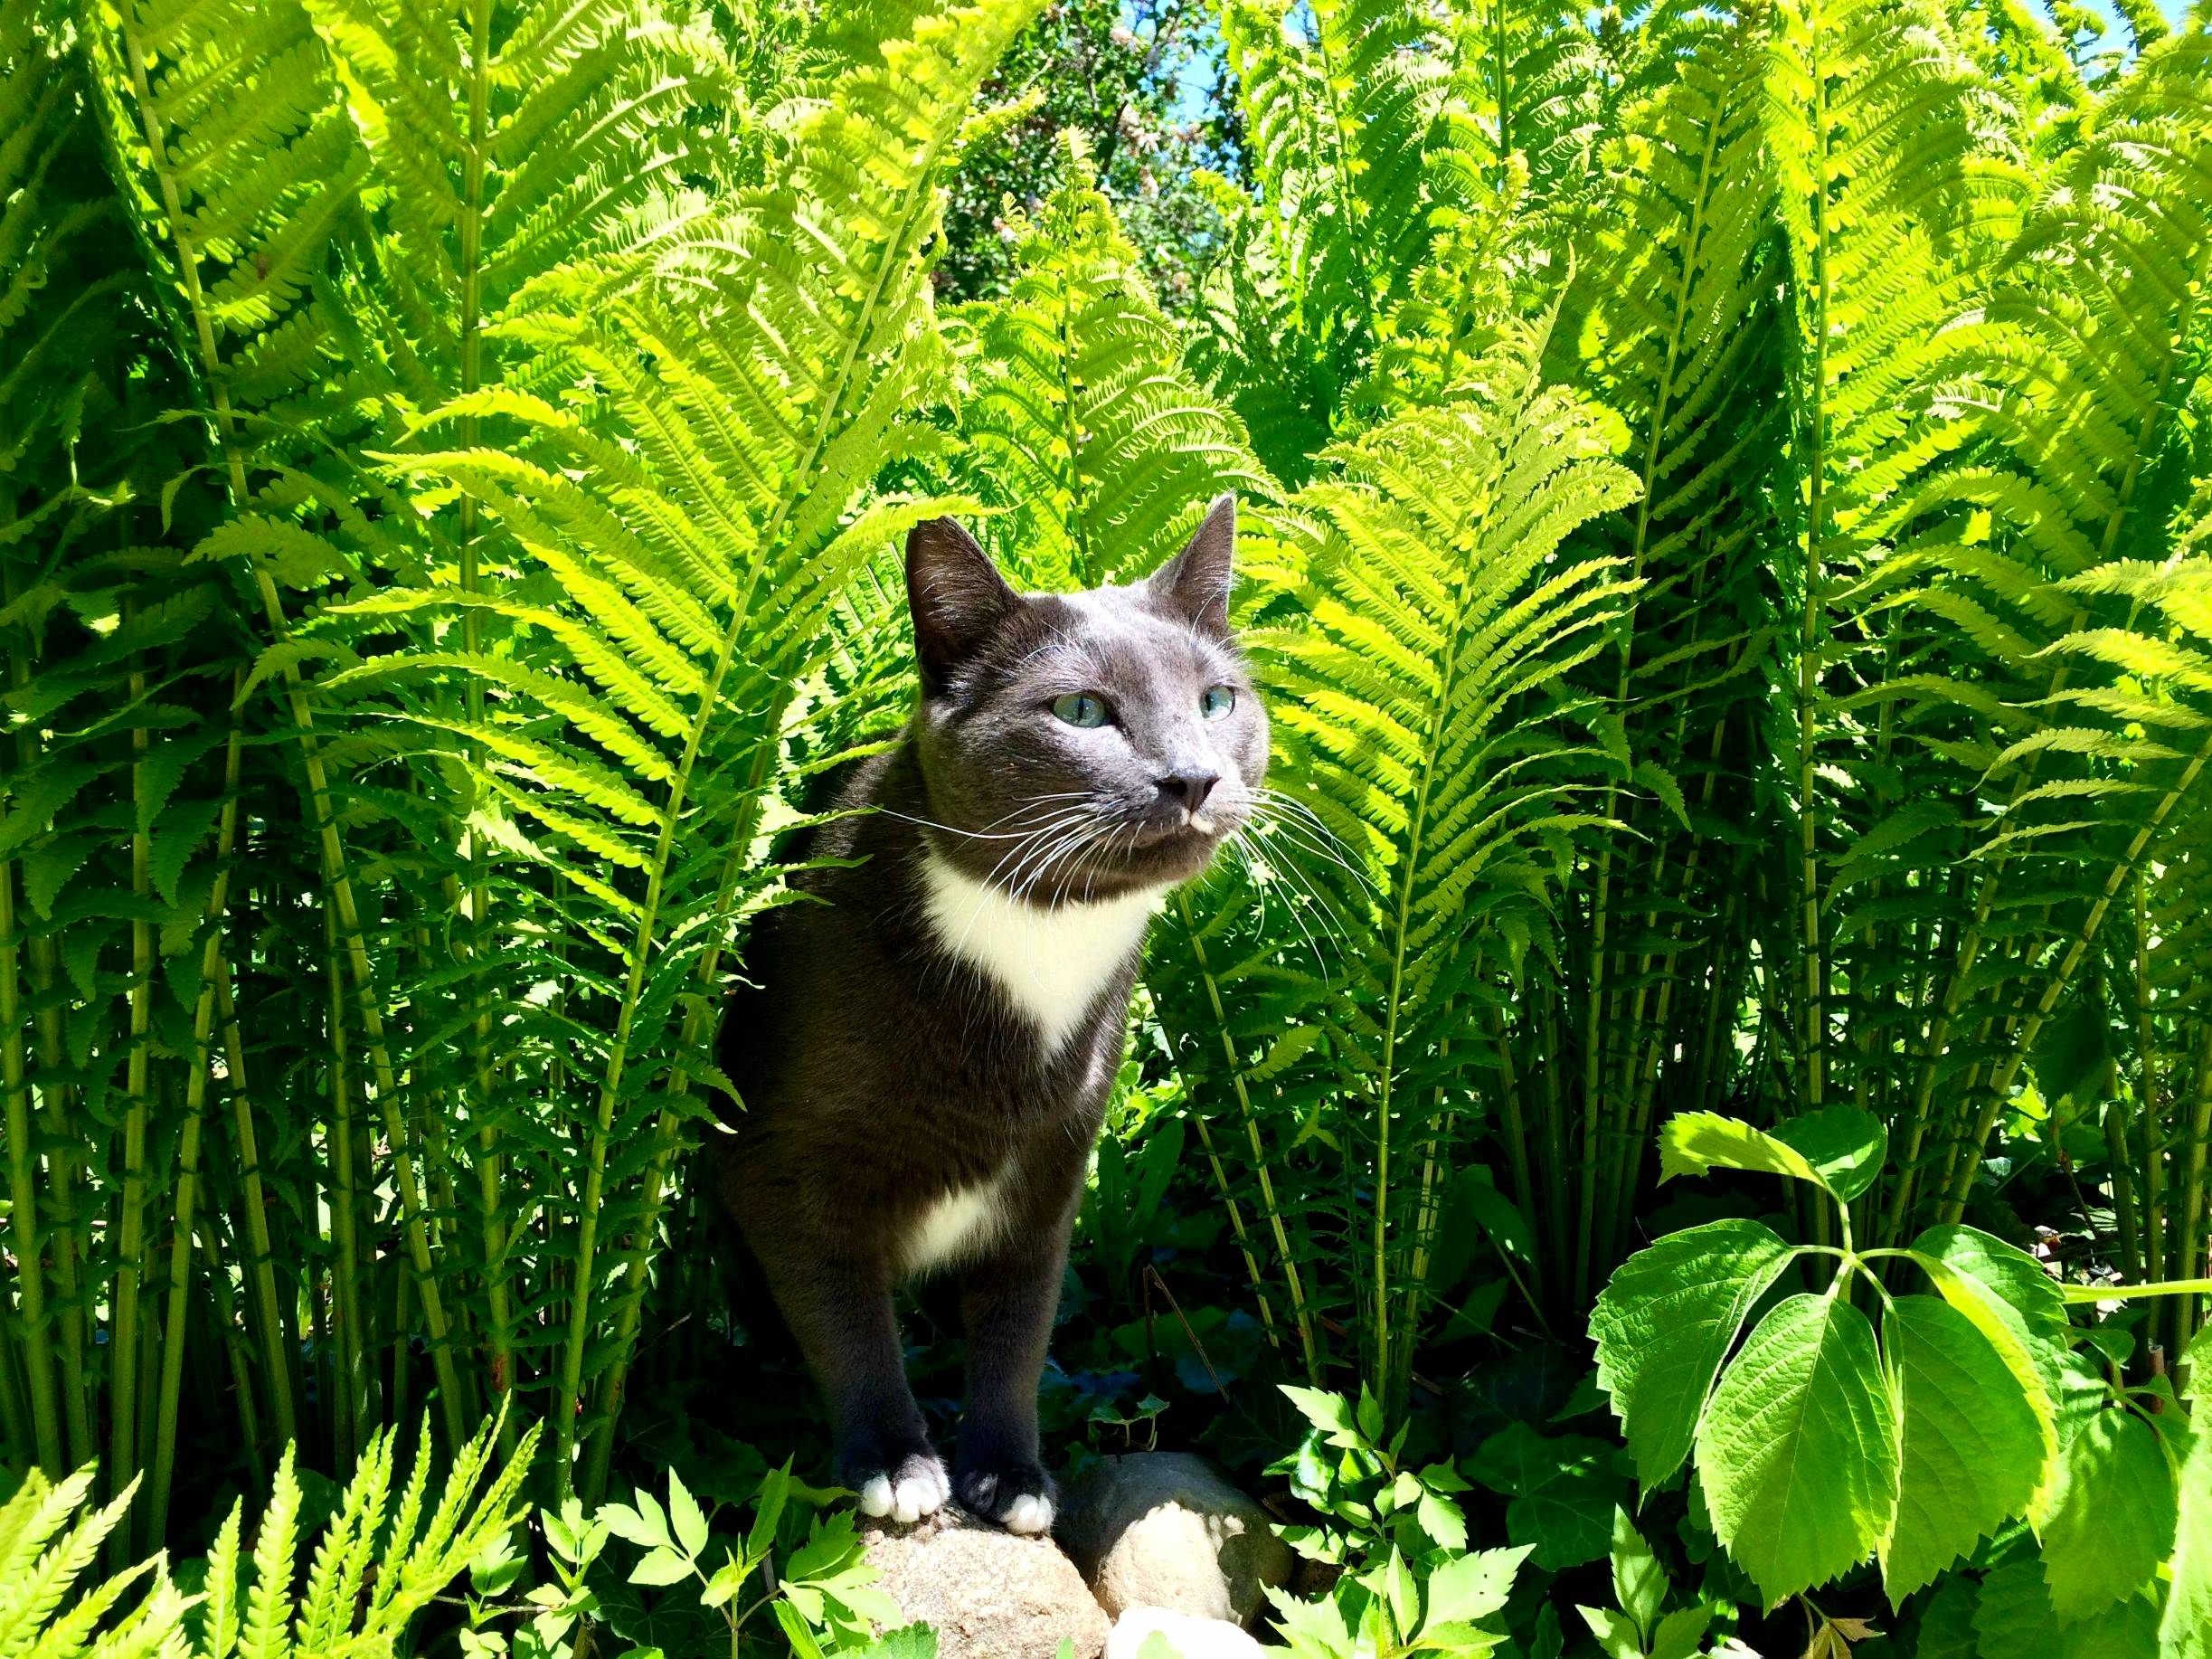 This is my cat bruce exploring the outdoors for the first time.